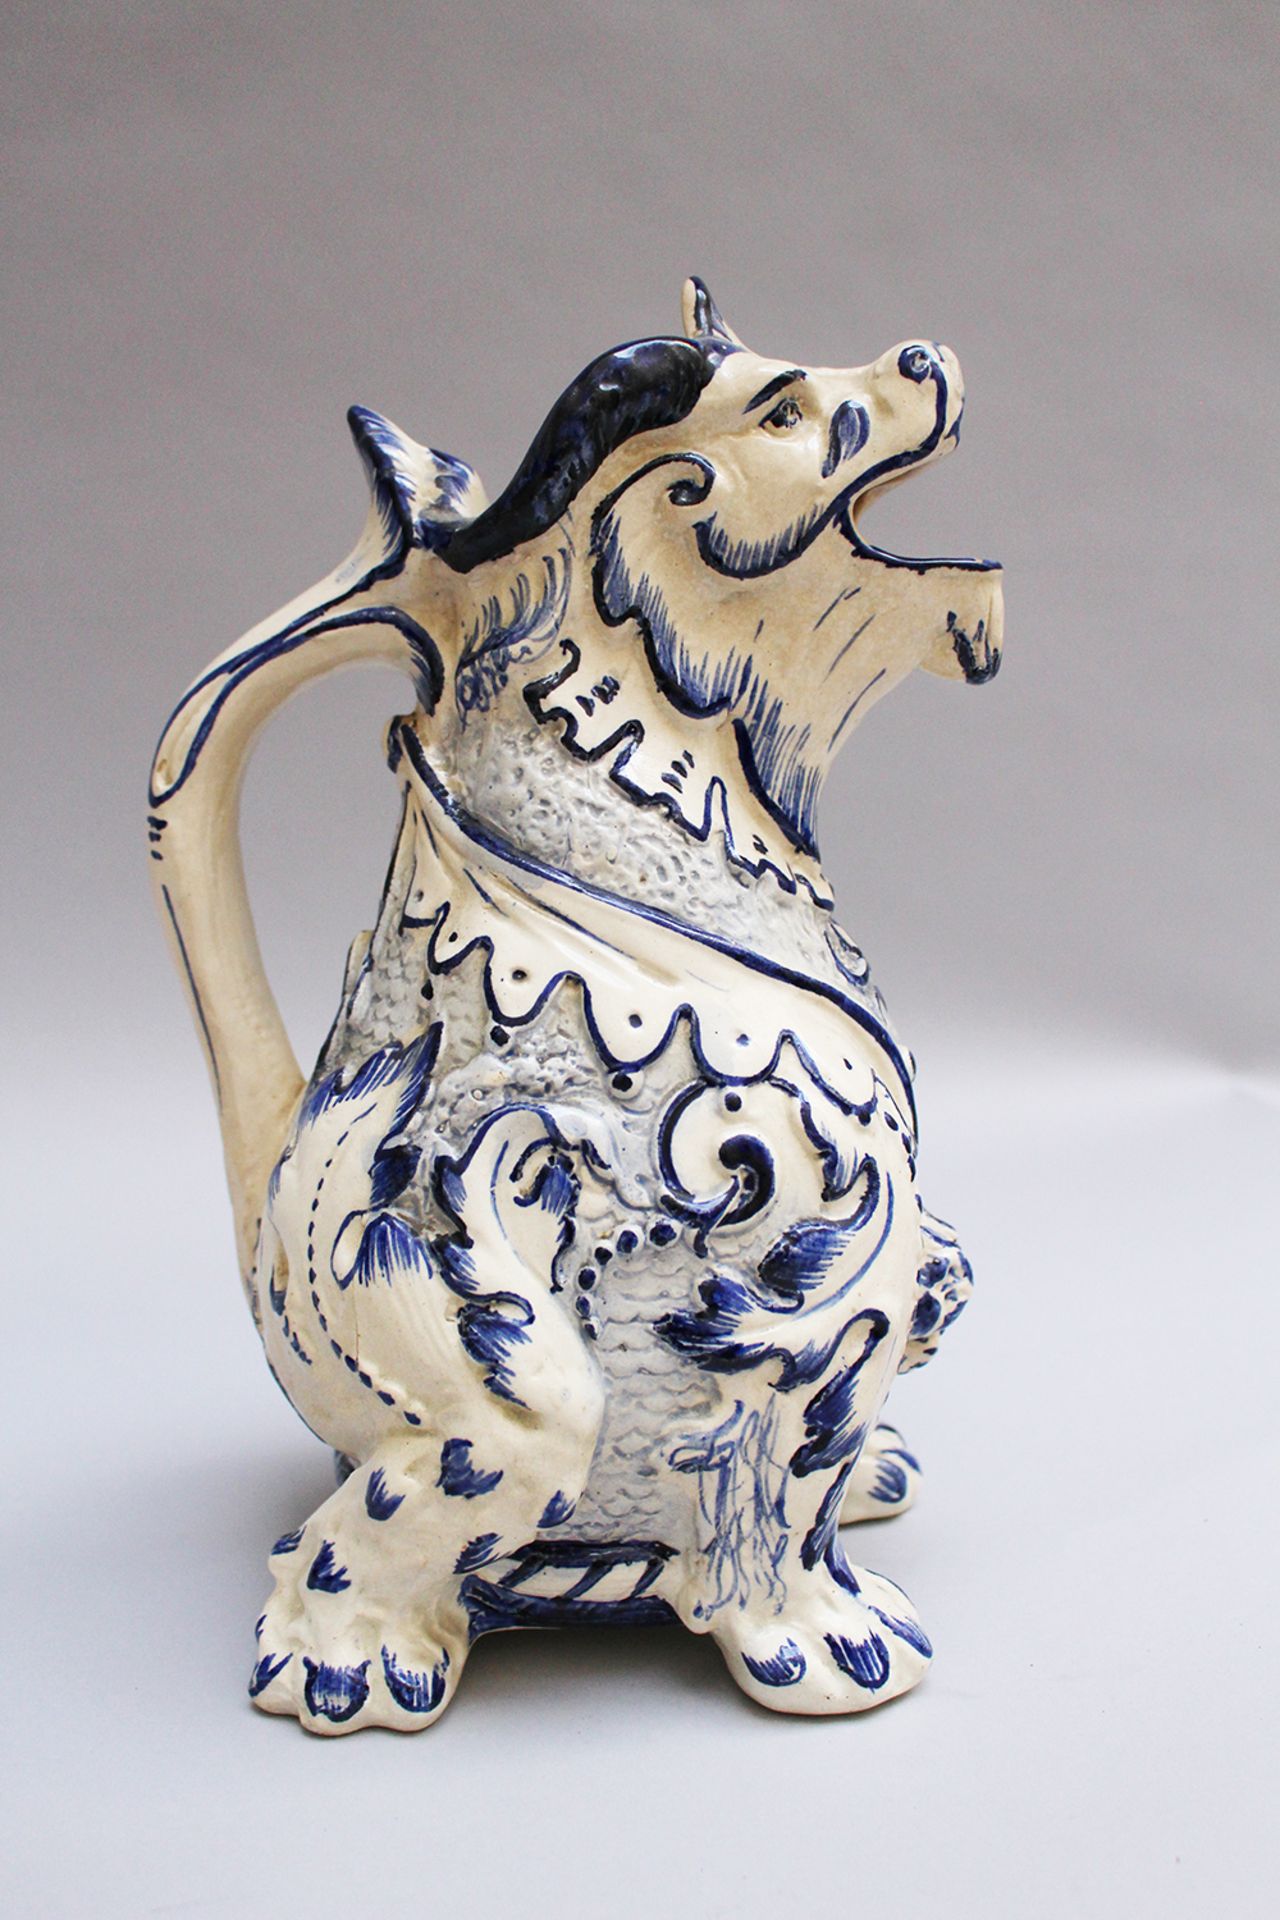 Ceramic jug in Emille Galle (1846-1904)- manner, lion with open mouth and handgrip, painted and glaz - Bild 2 aus 3